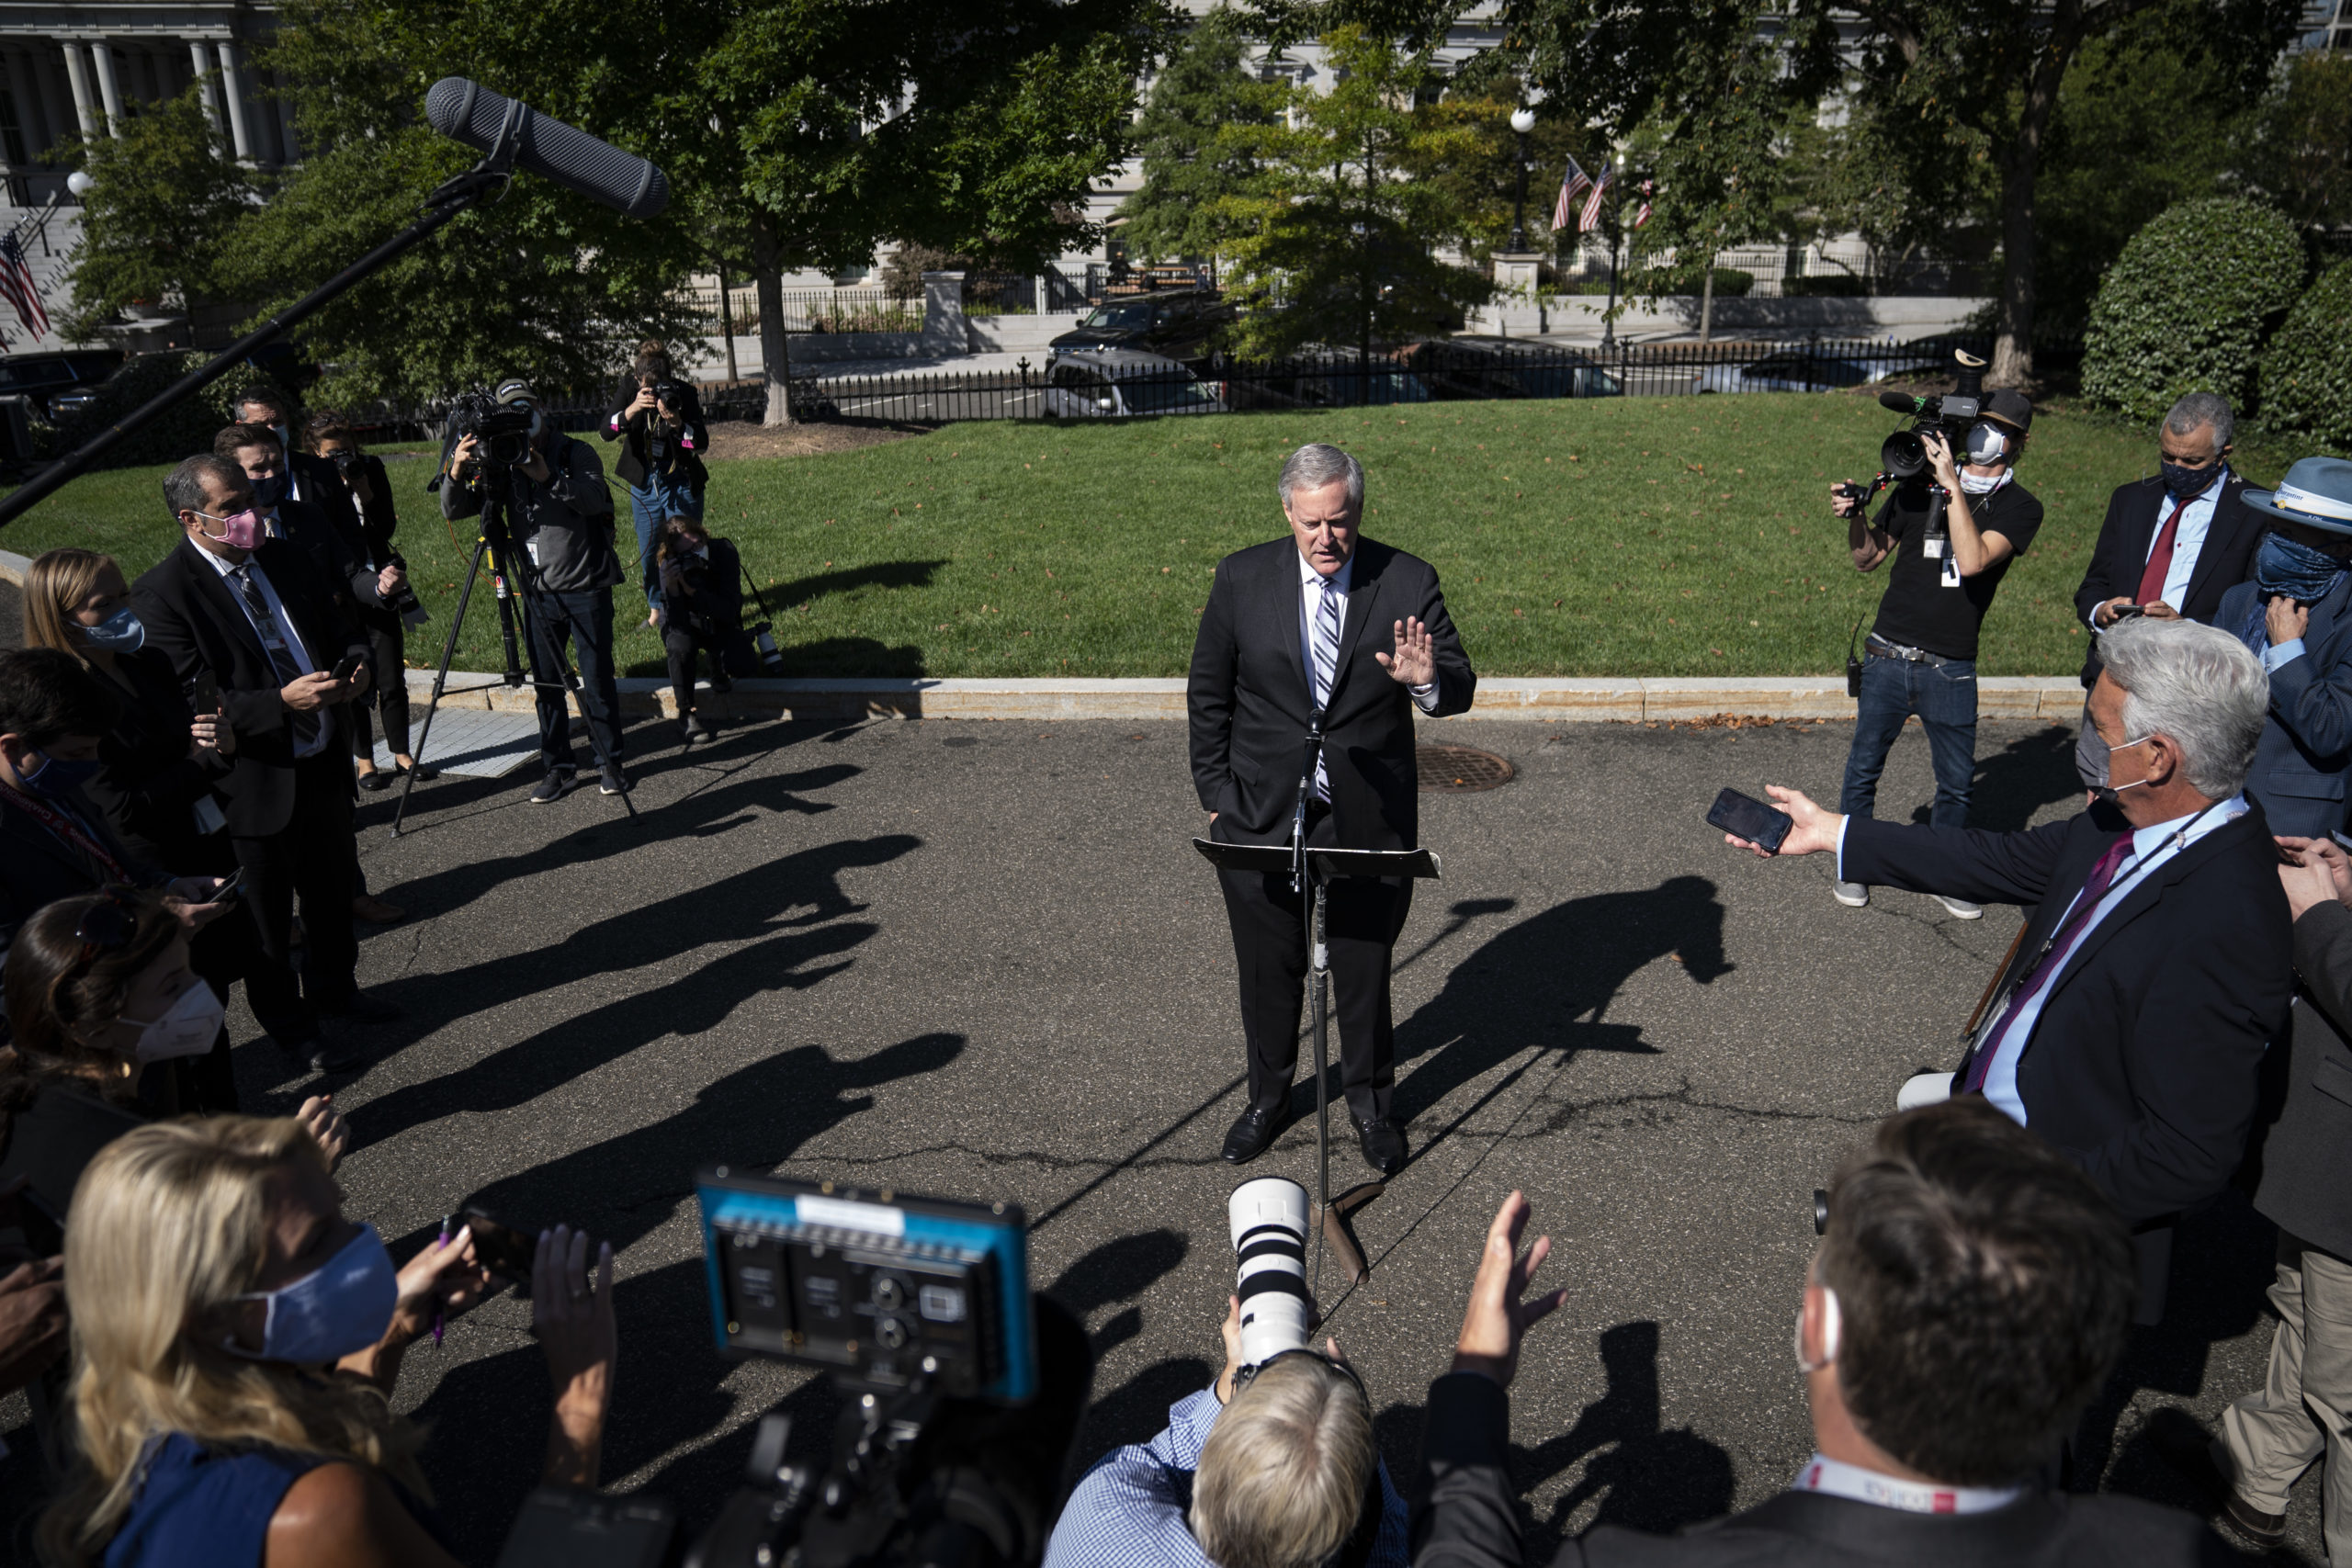 WASHINGTON, DC - OCTOBER 02: White House Chief of Staff Mark Meadows speaks to reporters about President Trump's positive coronavirus test outside the West Wing of the White House on October 2, 2020 in Washington, DC. President Donald Trump and First Lady Melania Trump have both tested positive for coronavirus. (Photo by Drew Angerer/Getty Images)